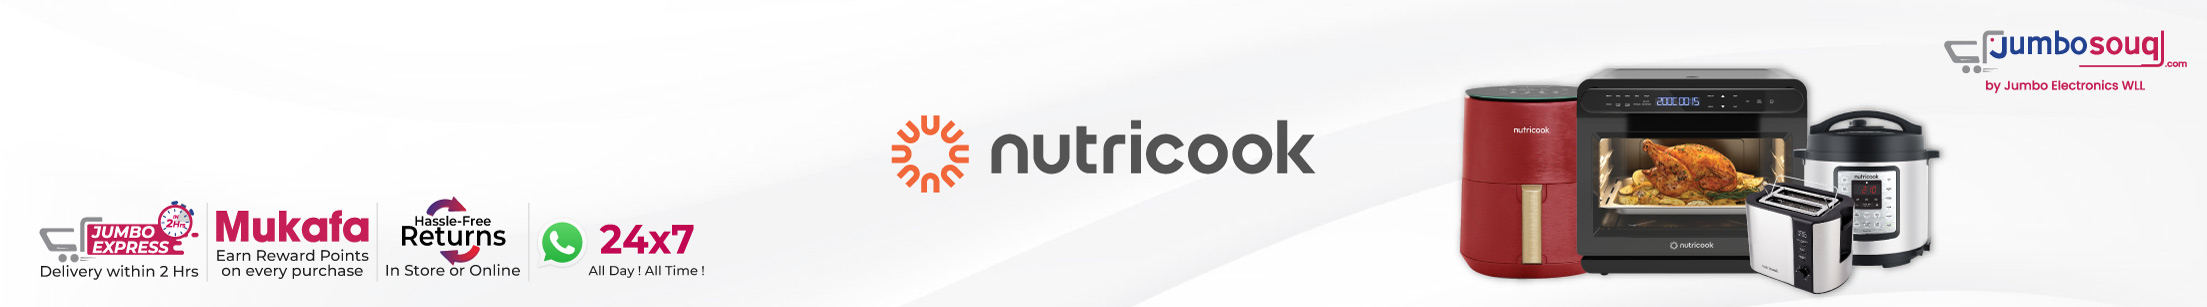 All Nutricook Products